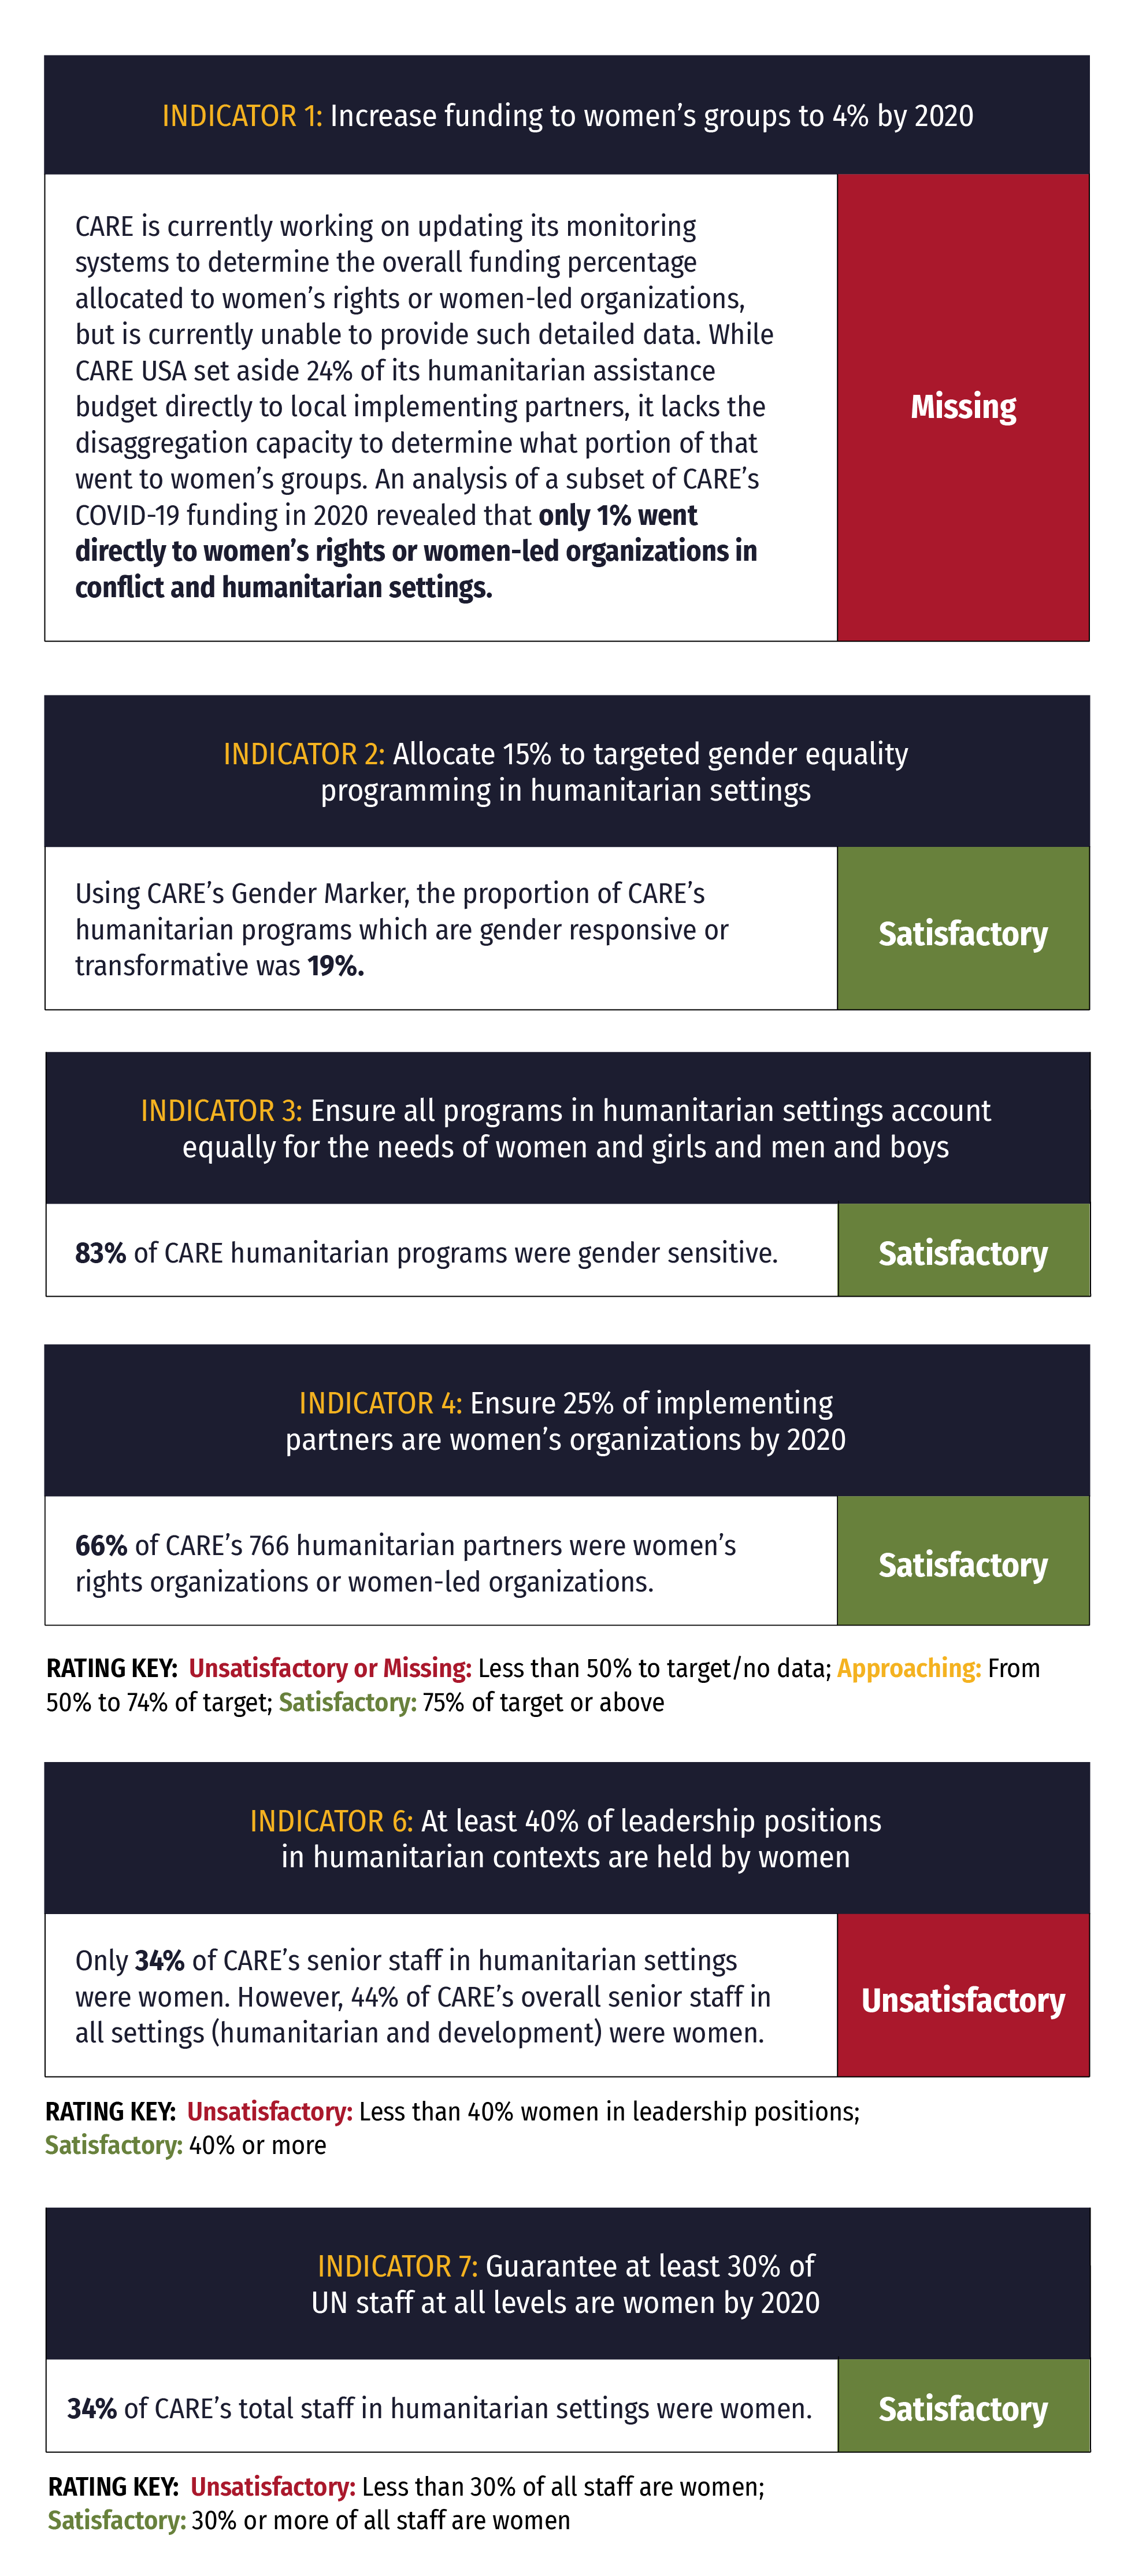 A report card for WFP's response to gender equality in humanitarian settings, showing that they scored 'Satisfactory' for indicators 2, 3, 4 and 7, 'Unsatisfactory' for indicator 6, and 'Missing' for indicator 1.